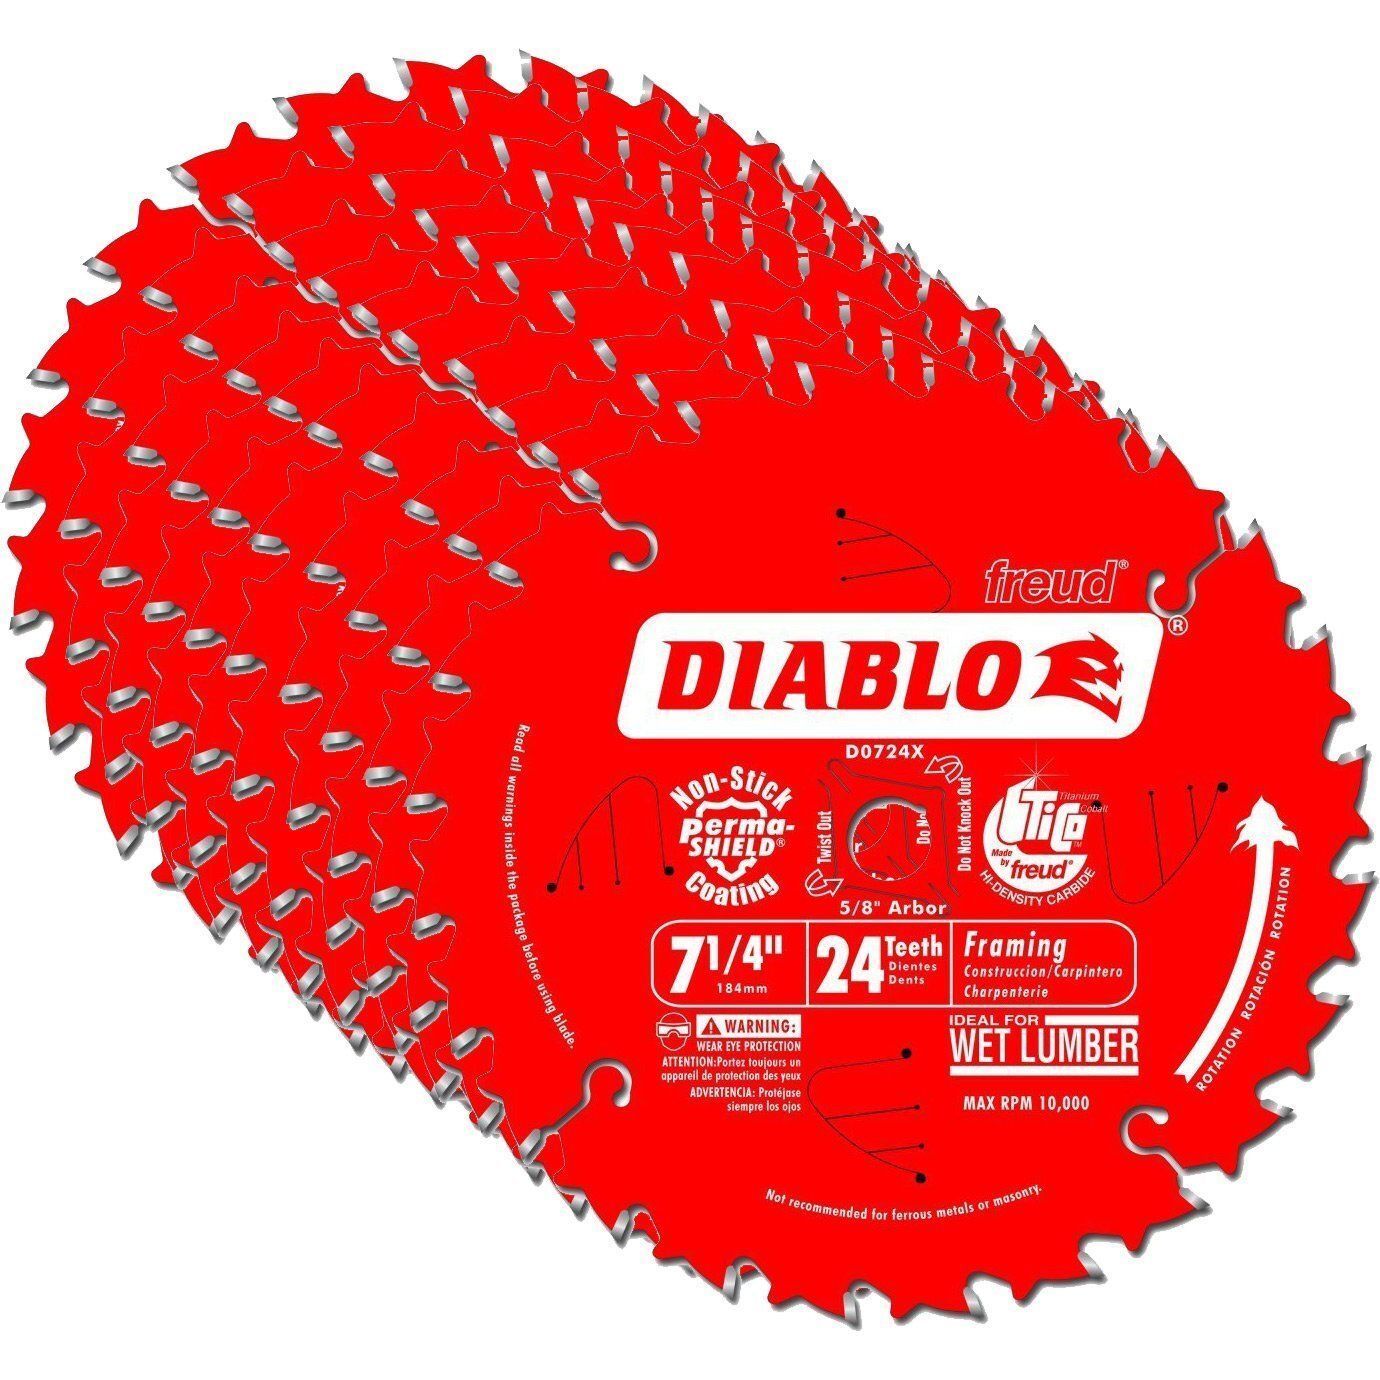 10 BLADES Freud D0724X A surprise price is realized Diablo 7-1 ! Super beauty product restock quality top! Framing 24T B 4-inch Saw ATB